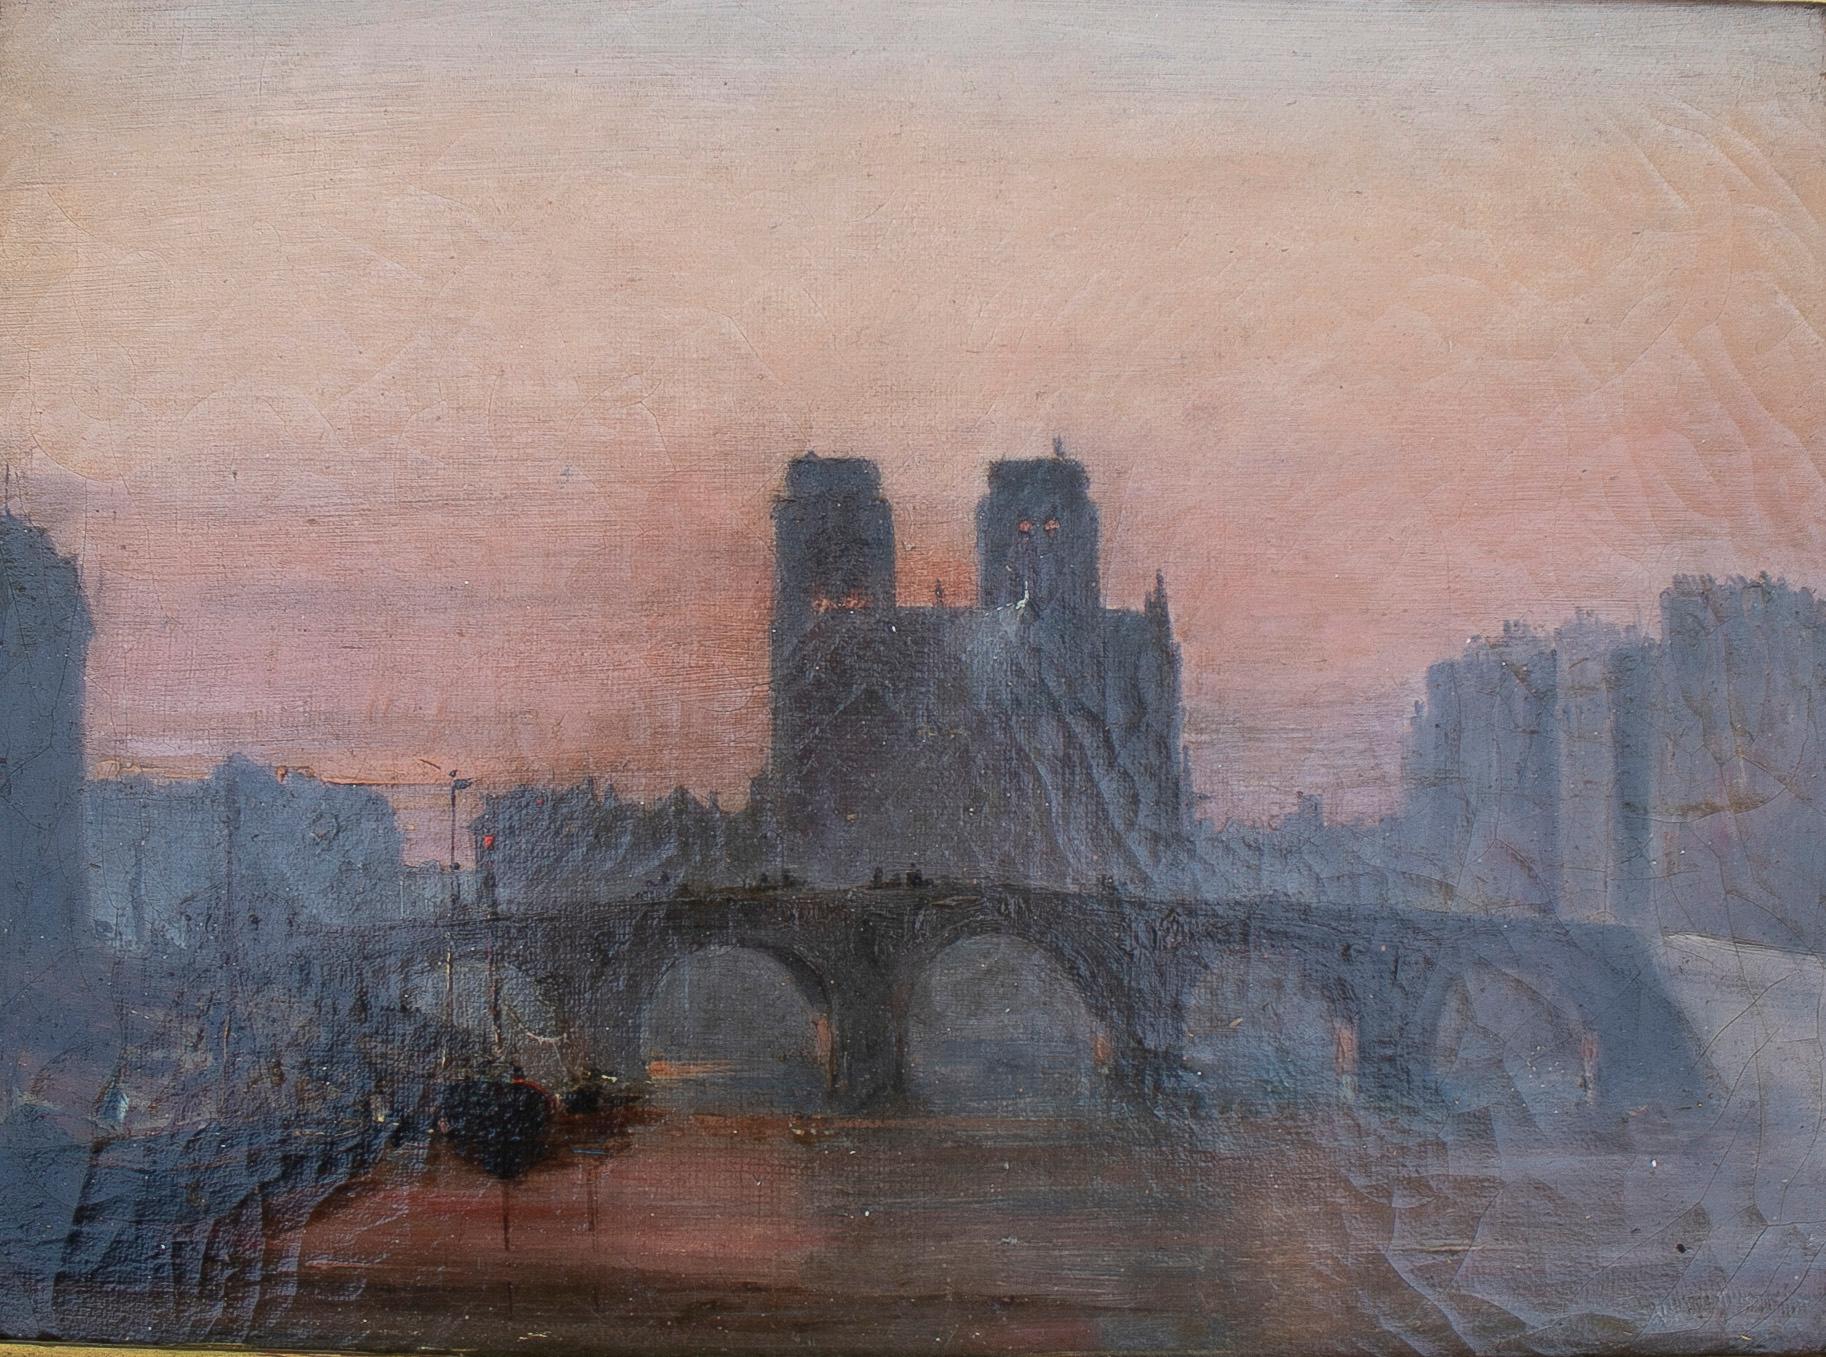 Original 19th century French impressionist Paris landscape painting, with the Senna river and Notre Dame.

Dimensions with frame: 47 x 38 x 5 cm.